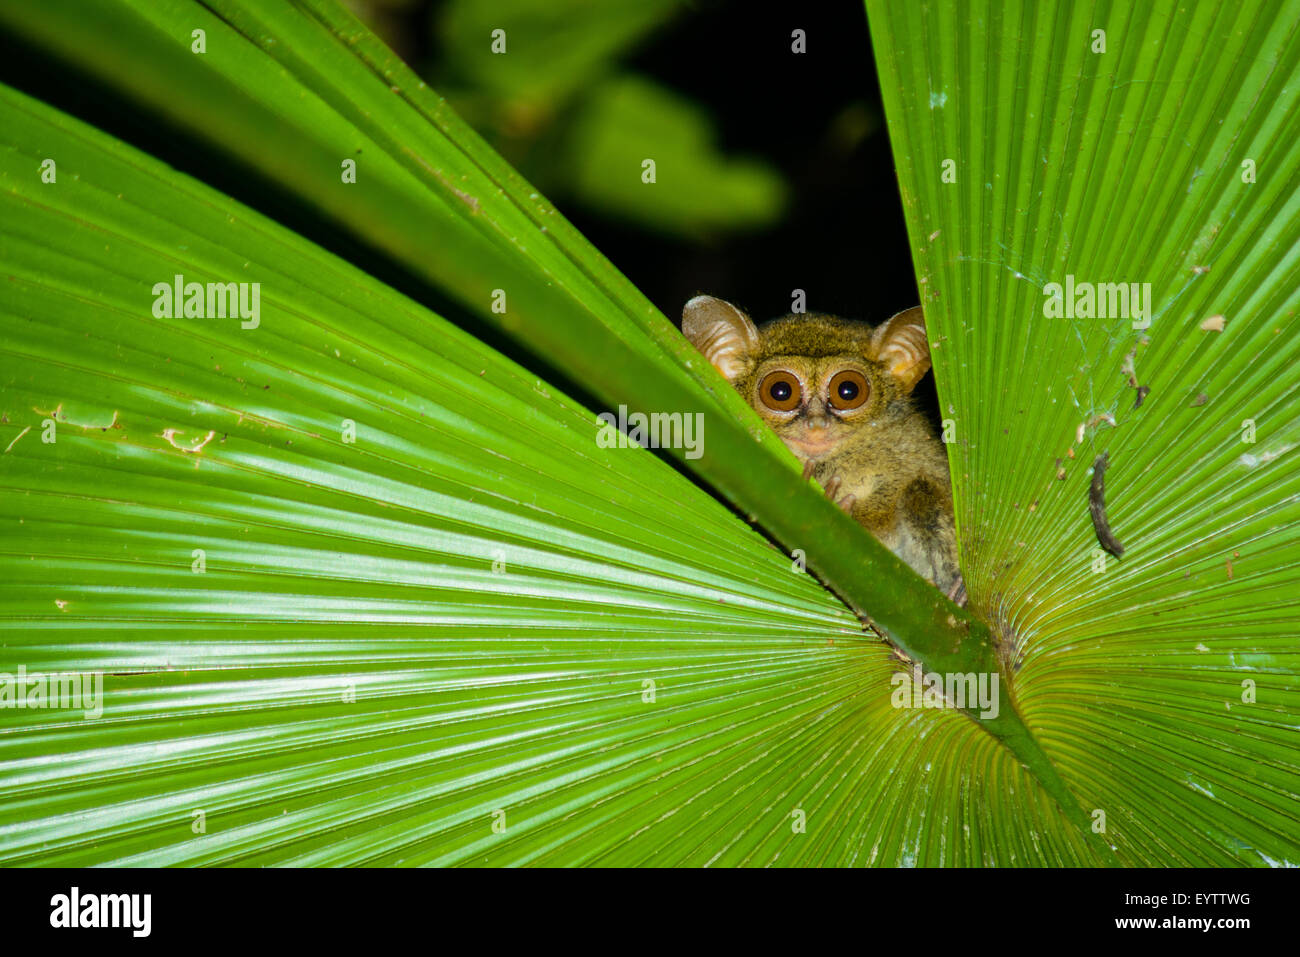 A tarsius from north sulawesi peekaboo from the gap of a palm leaf at night Stock Photo